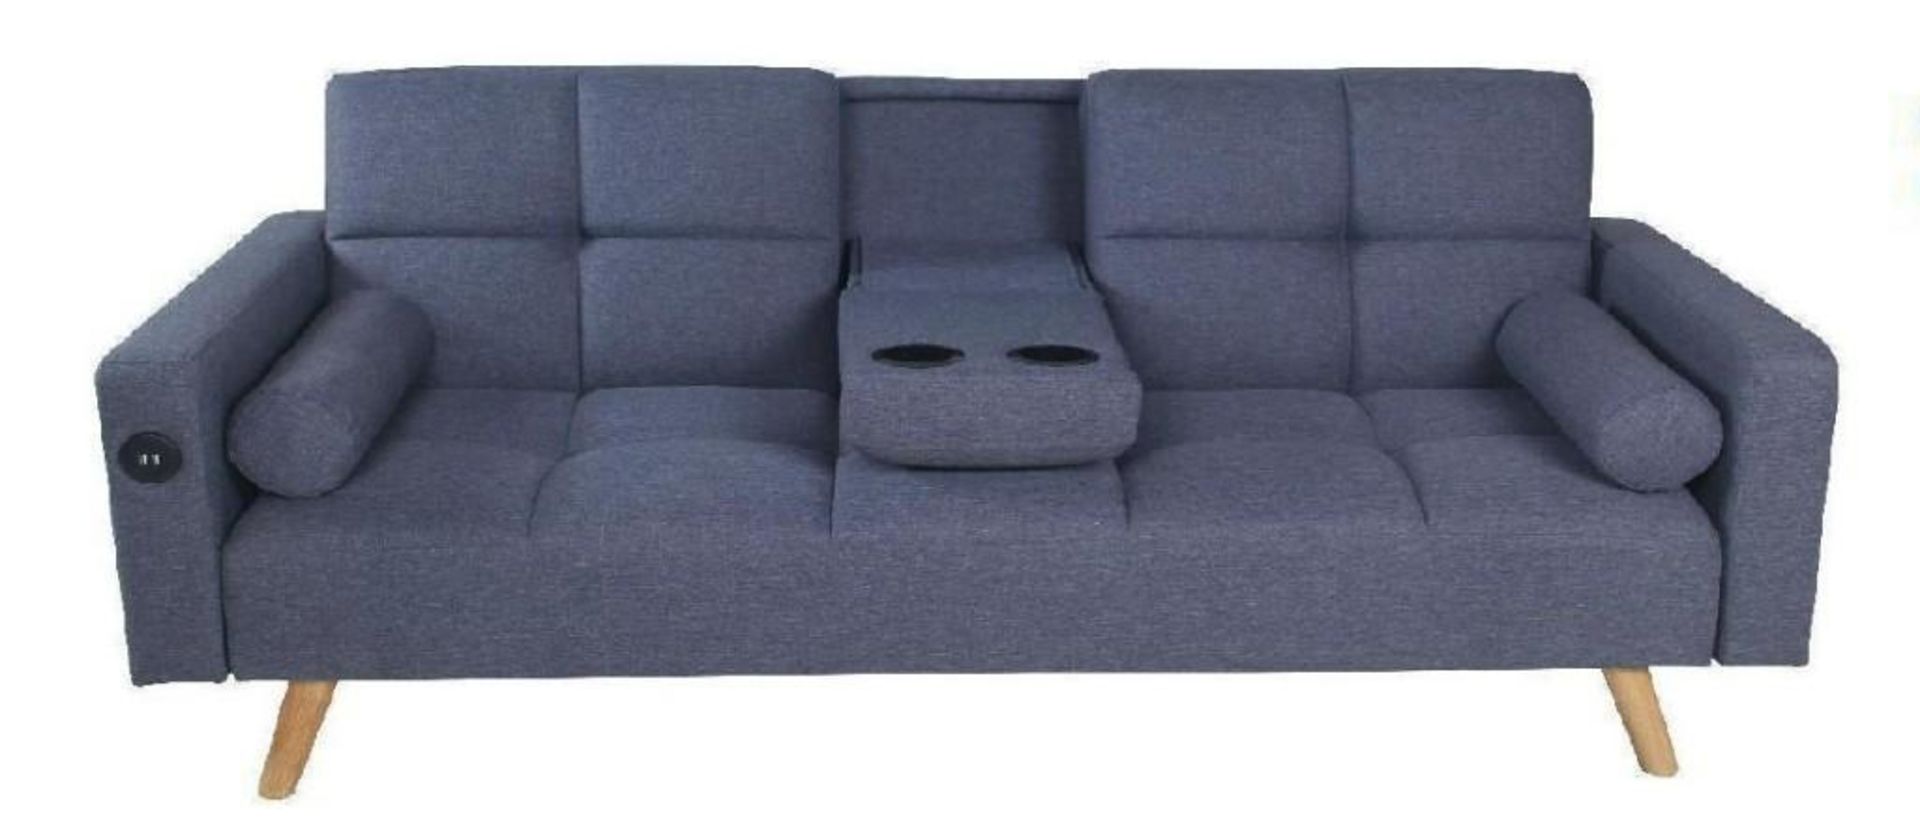 *BRAND NEW* Heavy Duty Clic Clac sofa bed with 2 bolsters, dual usb & charger socket. - Image 5 of 11